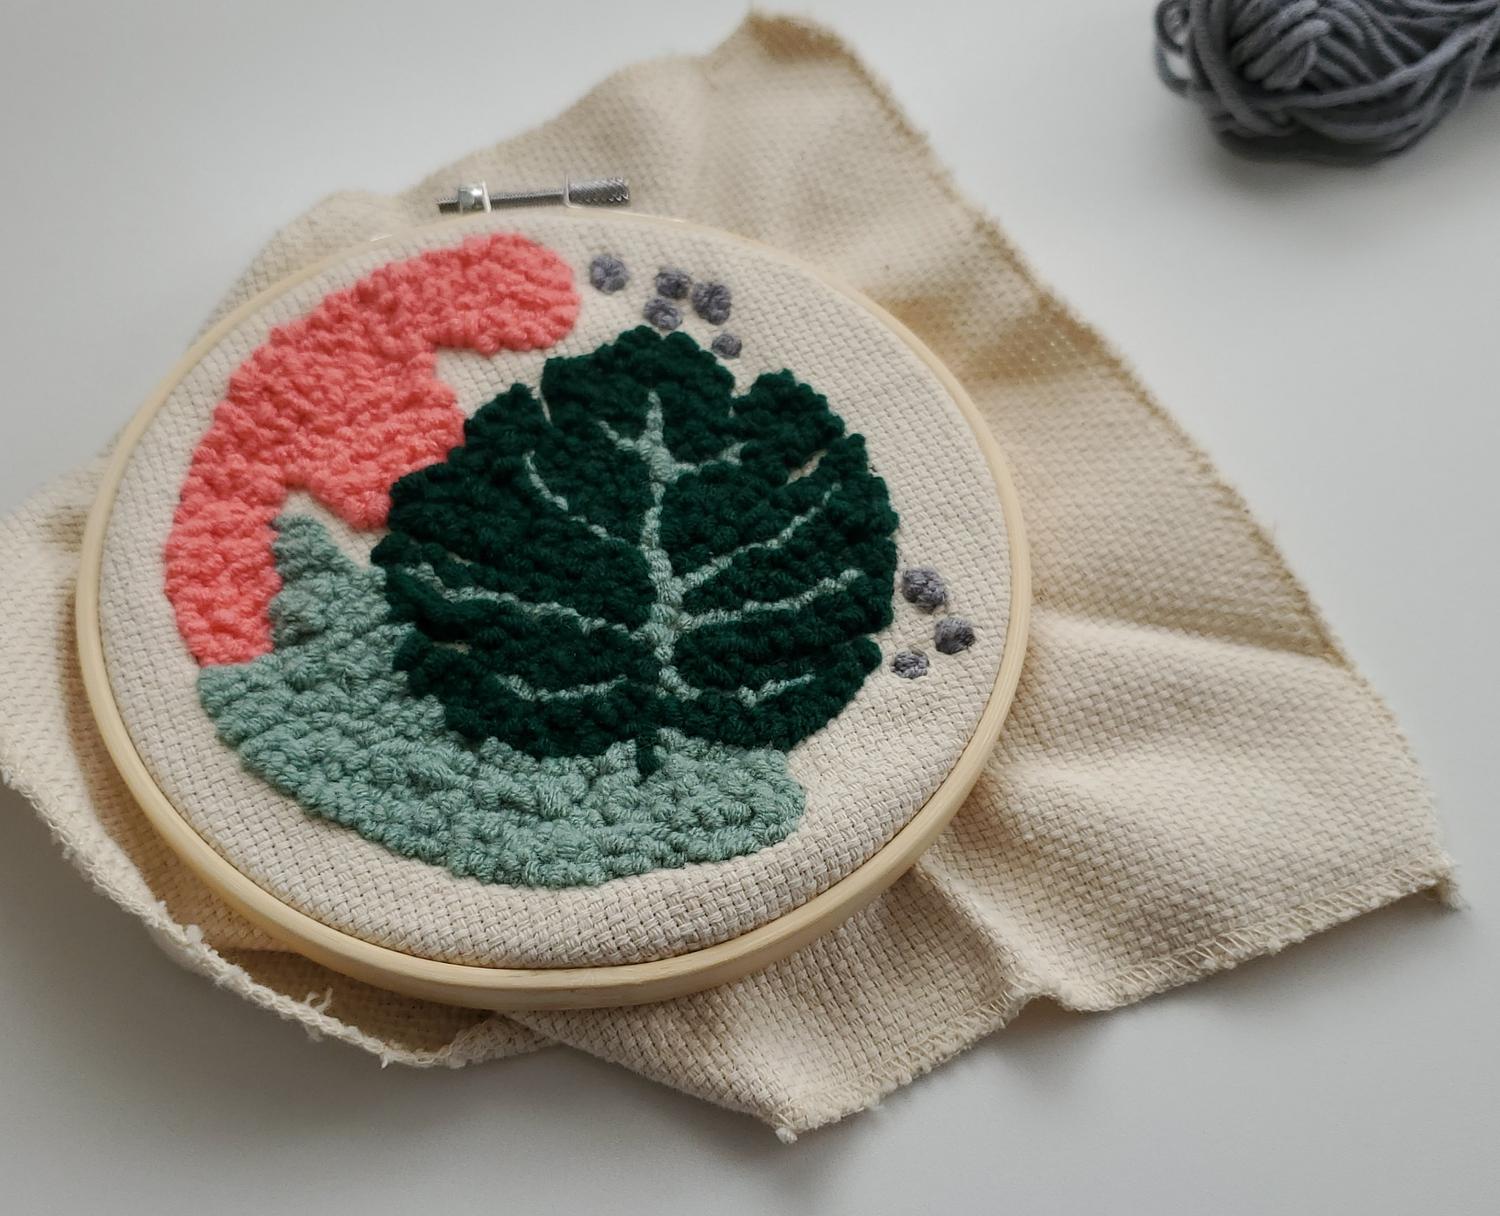 Renewal–Recycled textile embroidery workshop by Grandpa Cat